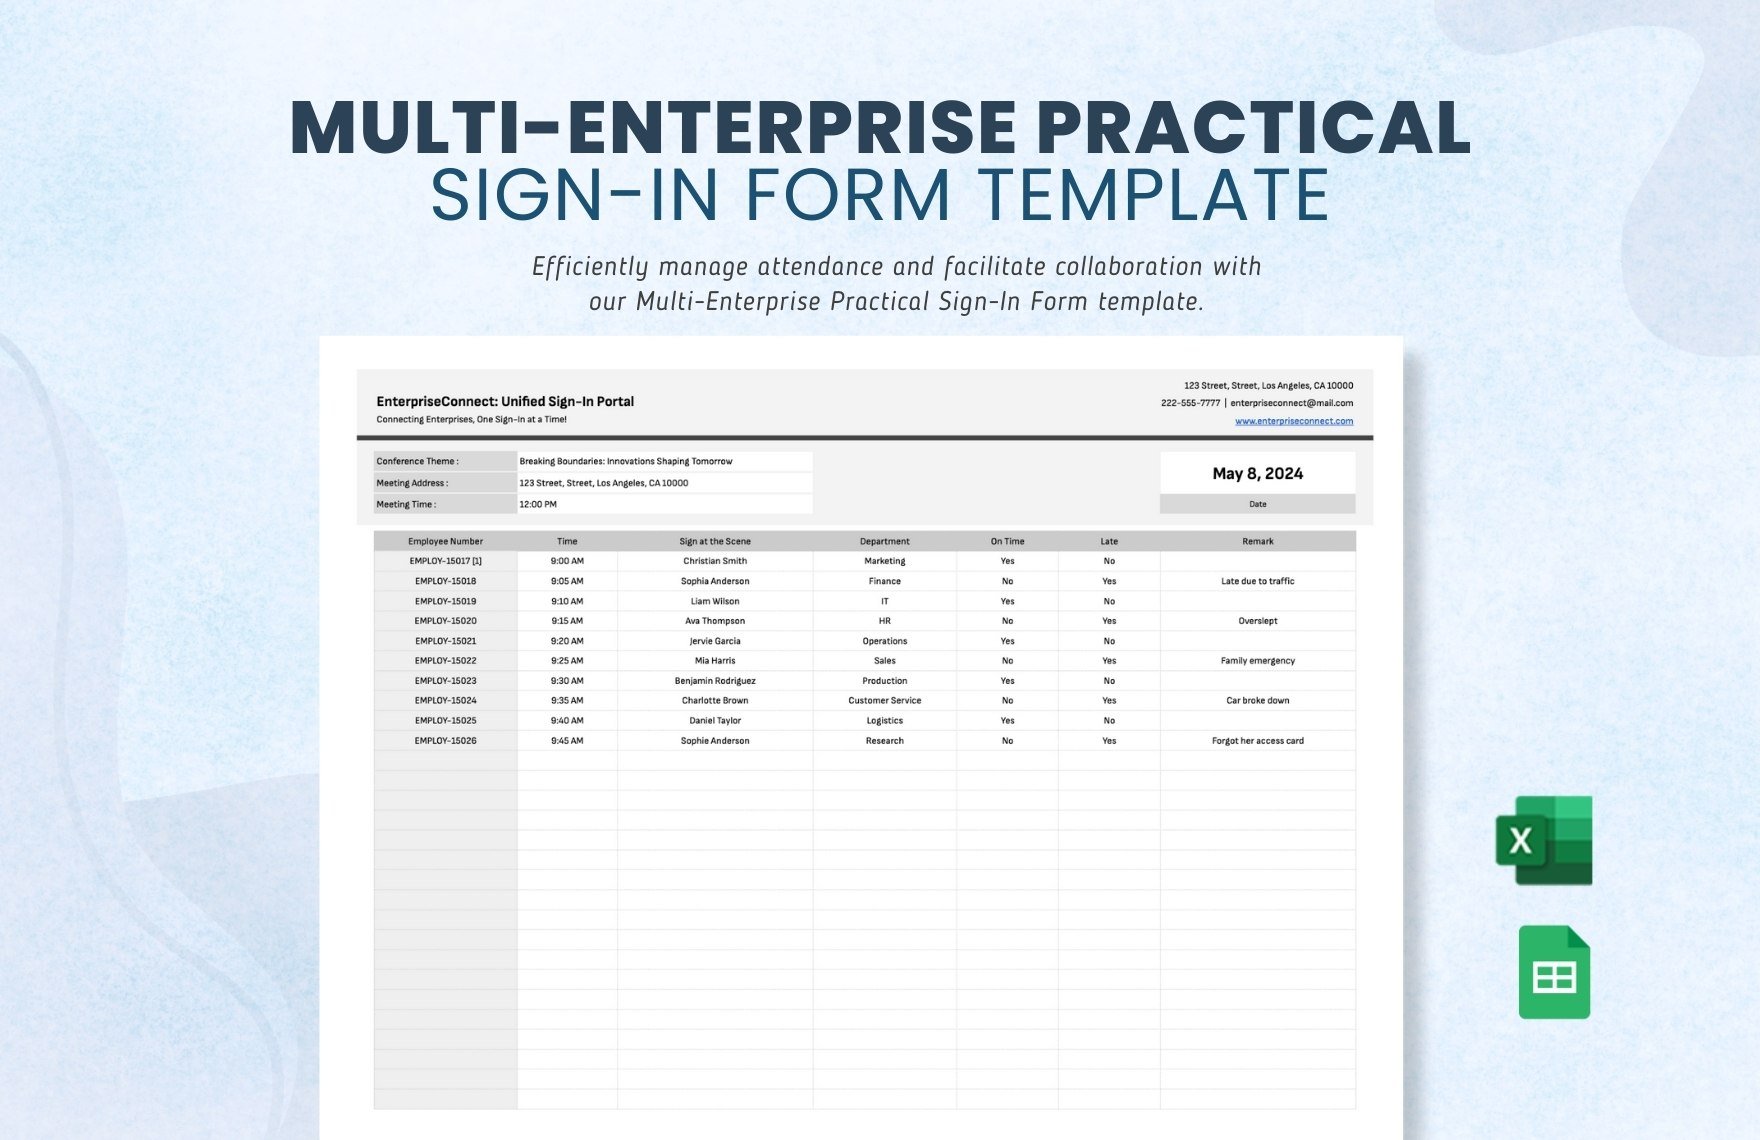 Multi-Enterprise Practical Sign-In Form Template in Excel, Google Sheets